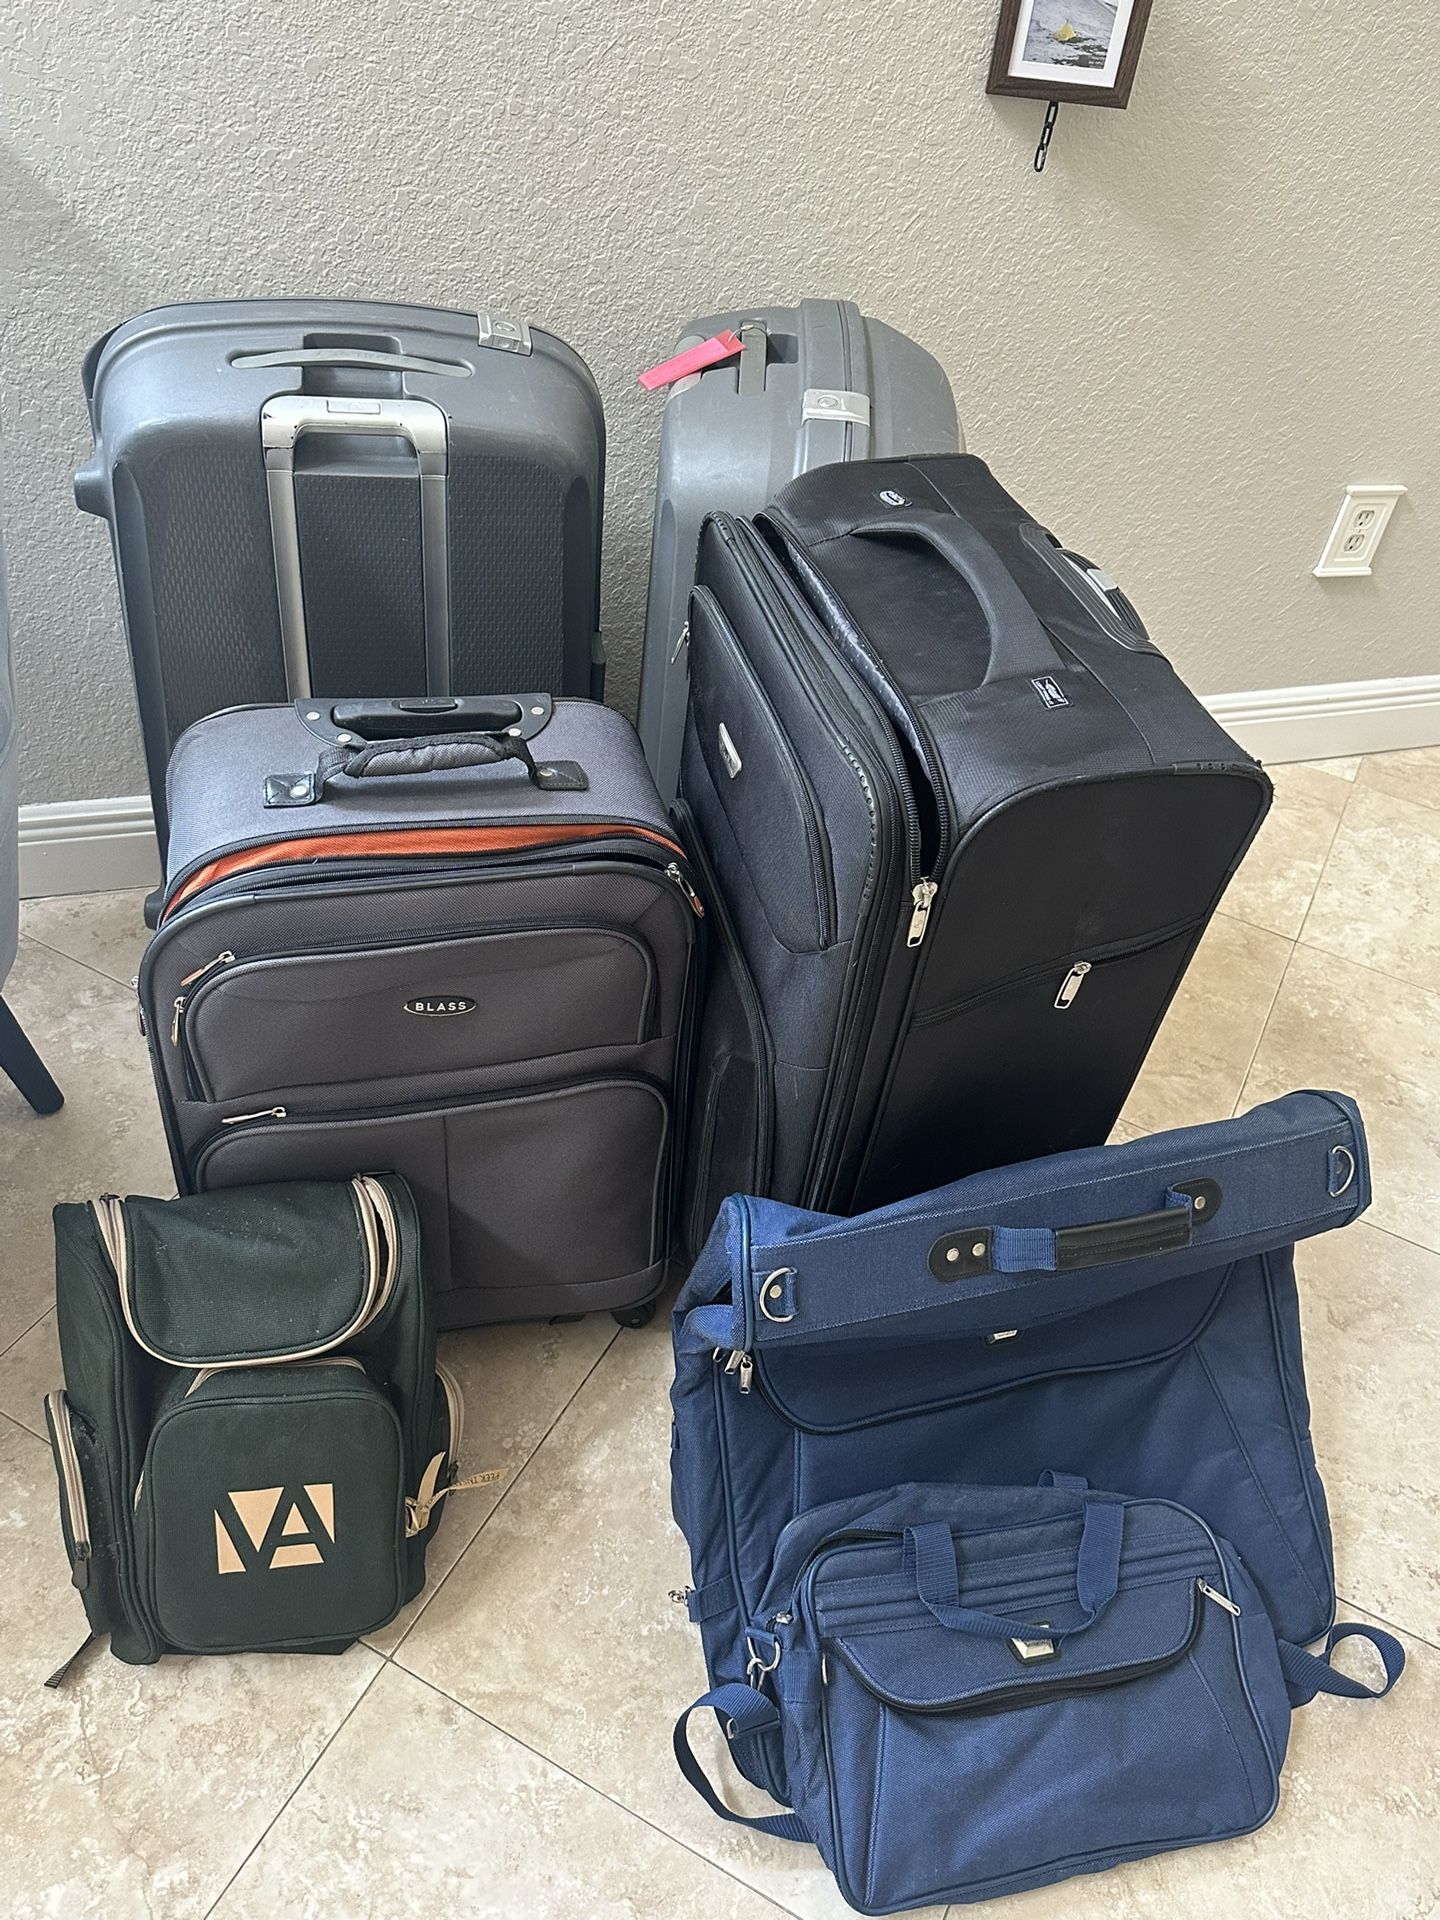 Used Luggage For Sale